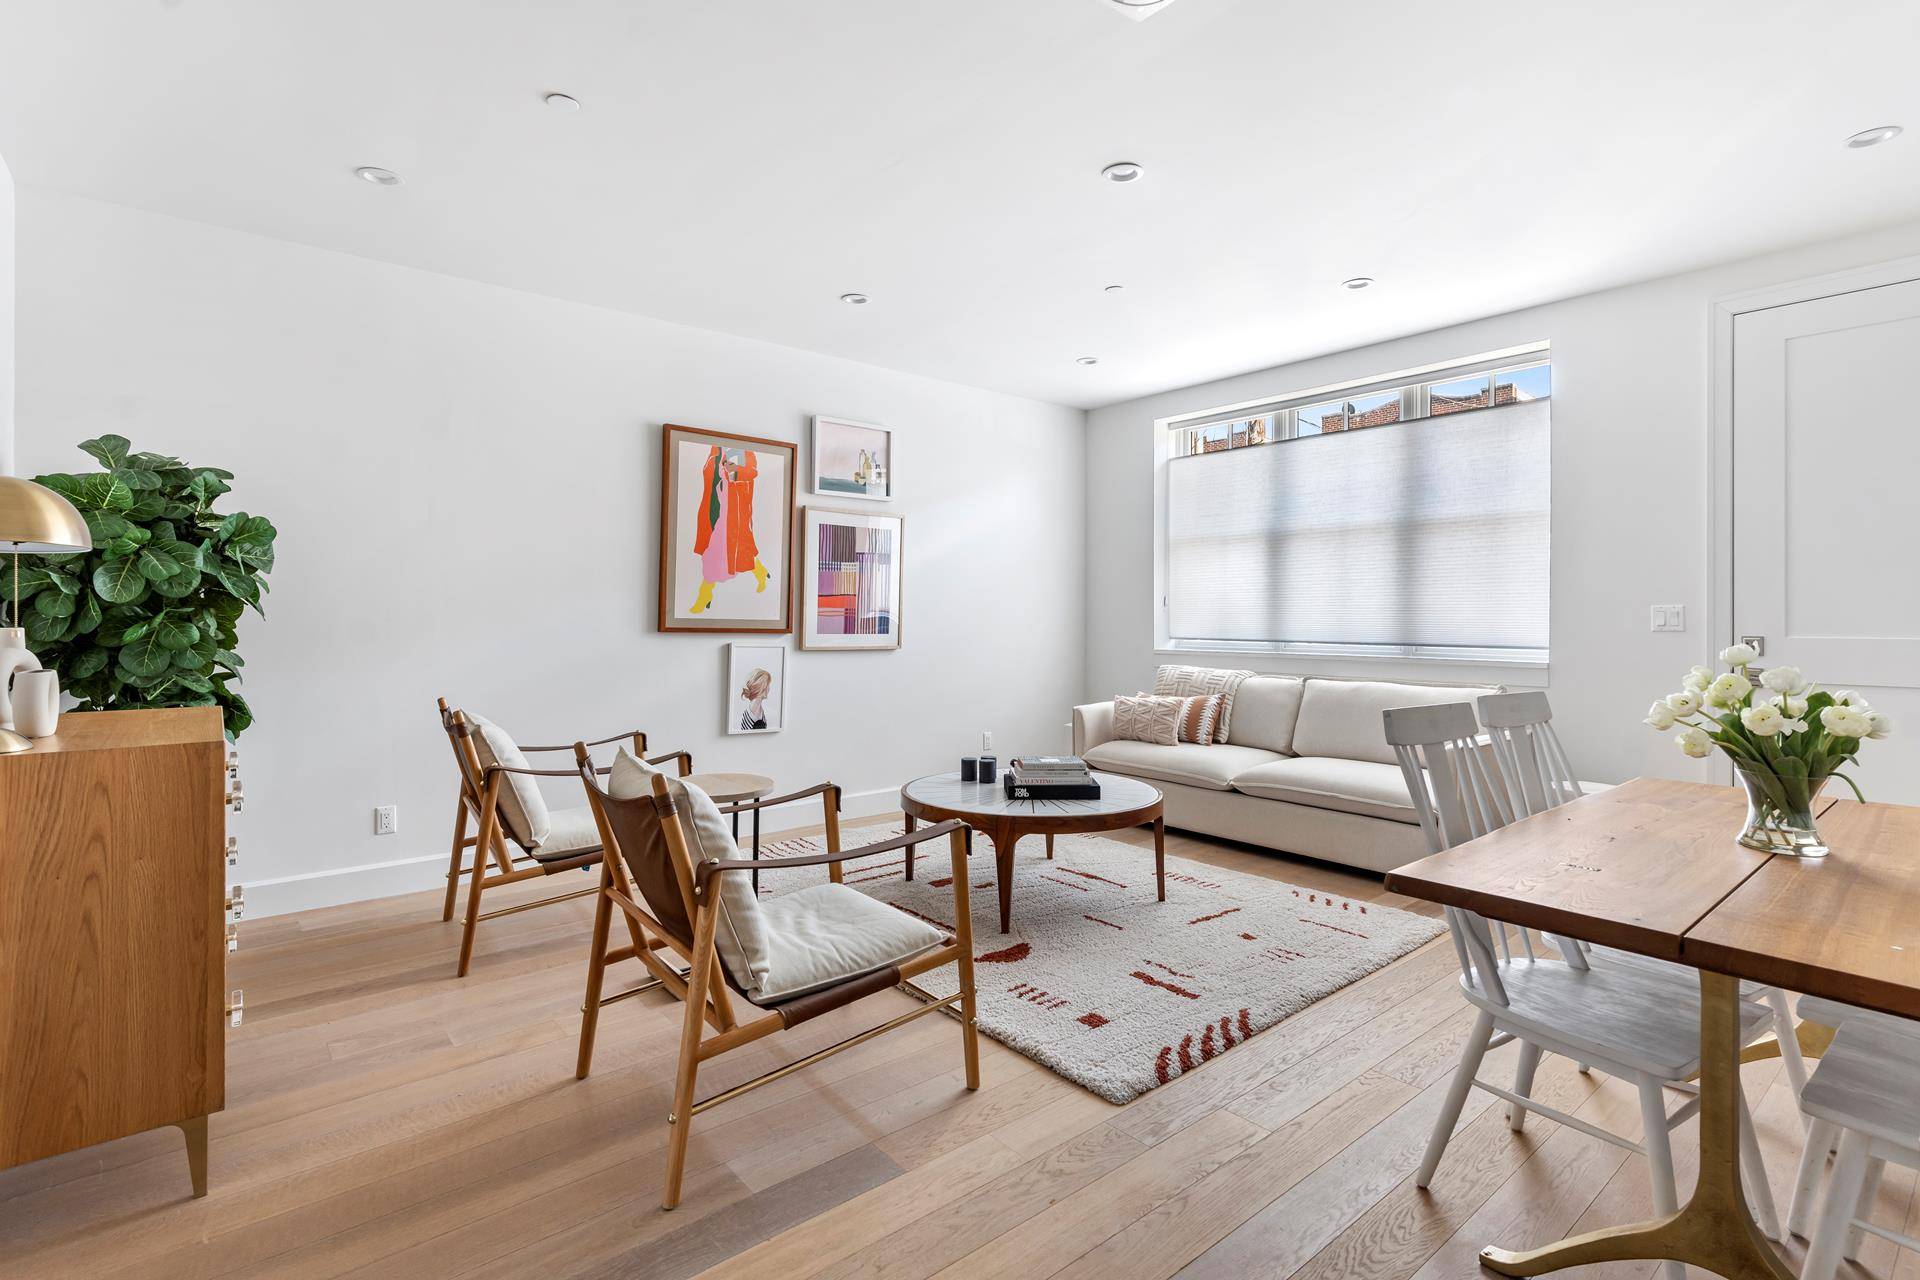 Welcome to 182 Minna Street A newly built, boutique condominium comprised of six generously sized two bedroom 2BR and three bedroom 3BR residences.